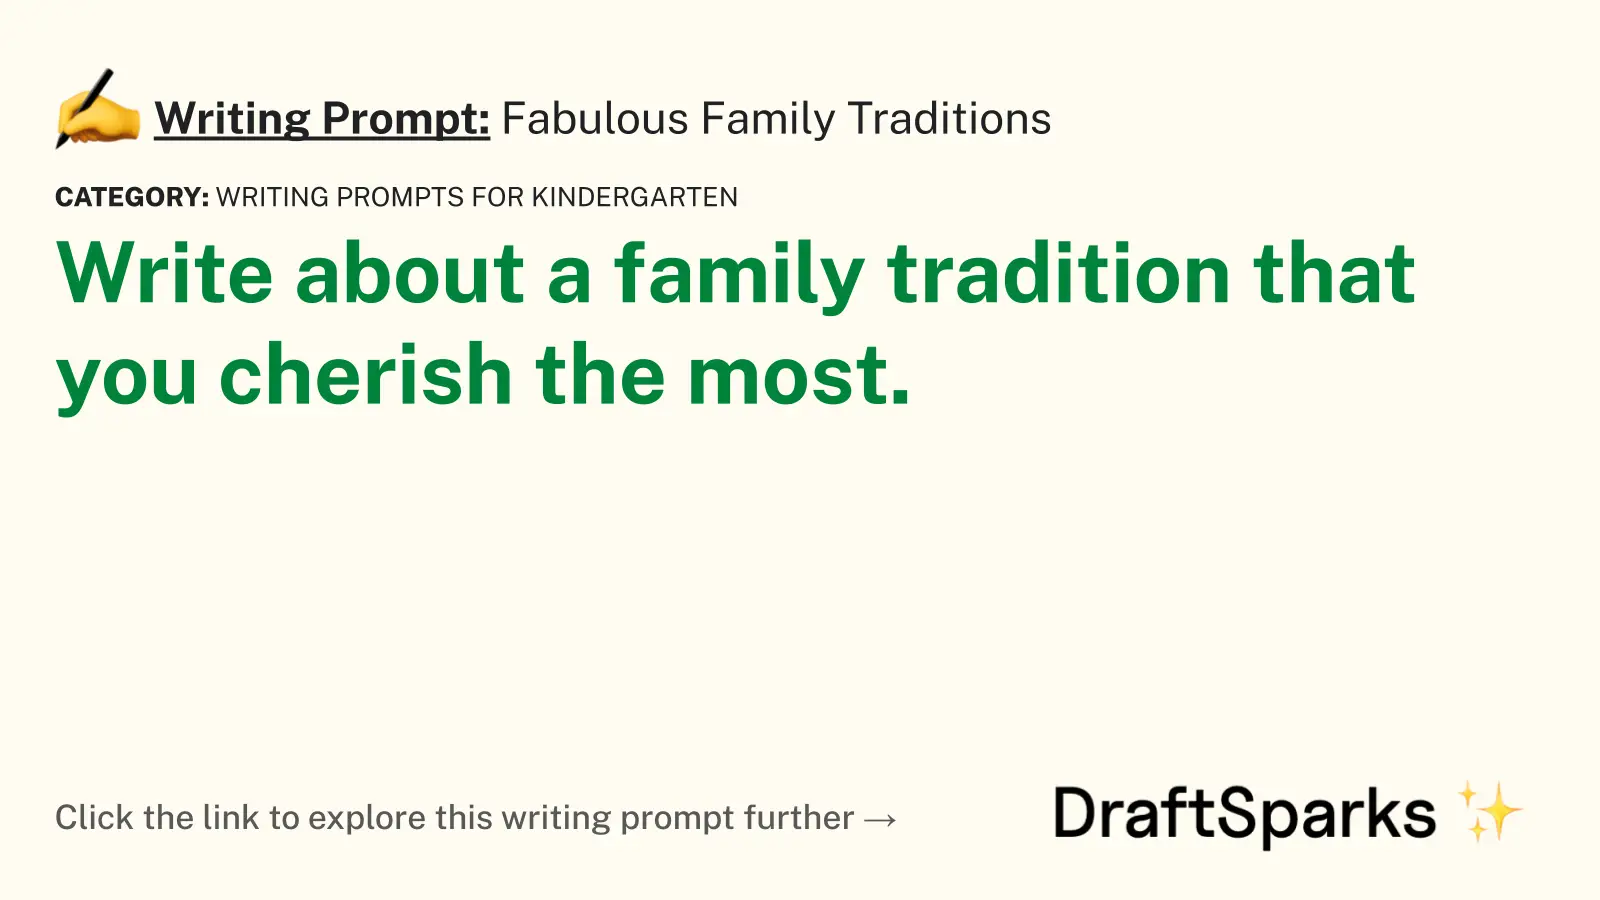 Fabulous Family Traditions